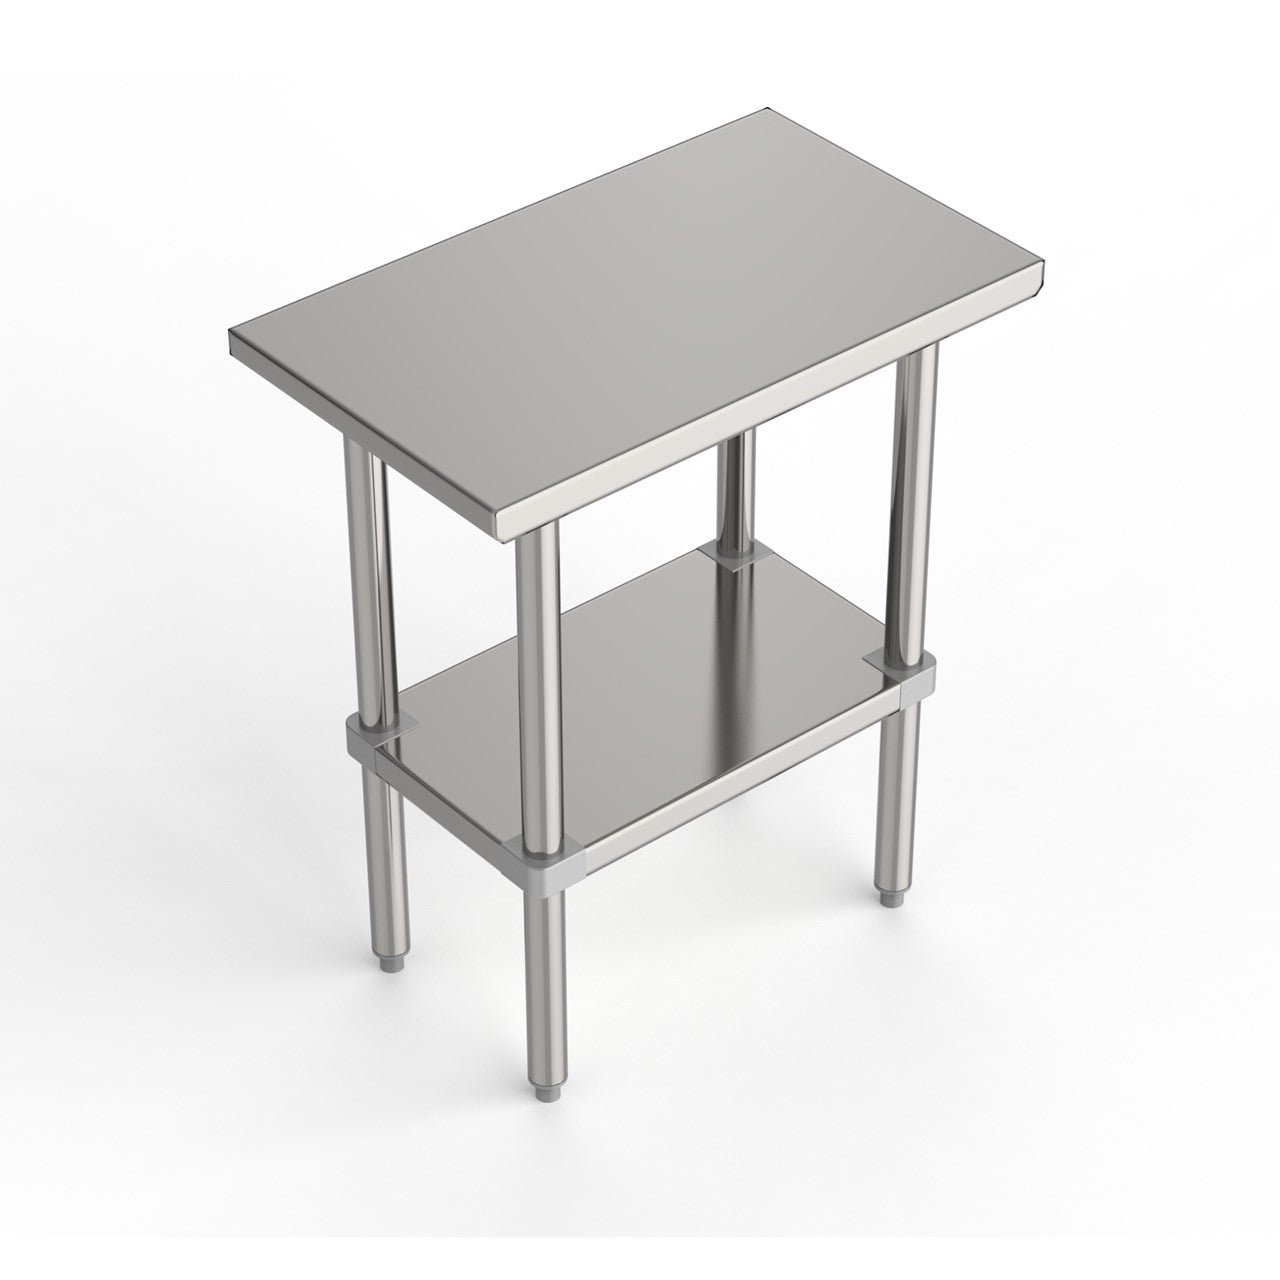 GSW Commercial Grade Flat Top Work Table with Stainless Steel Top, Galvanized Undershelf & Legs, Adjustable Bullet Feet, Perfect for Restaurant, Home, Office, Kitchen or Garage, NSF Approved (24"D x 18"L x 35"H)